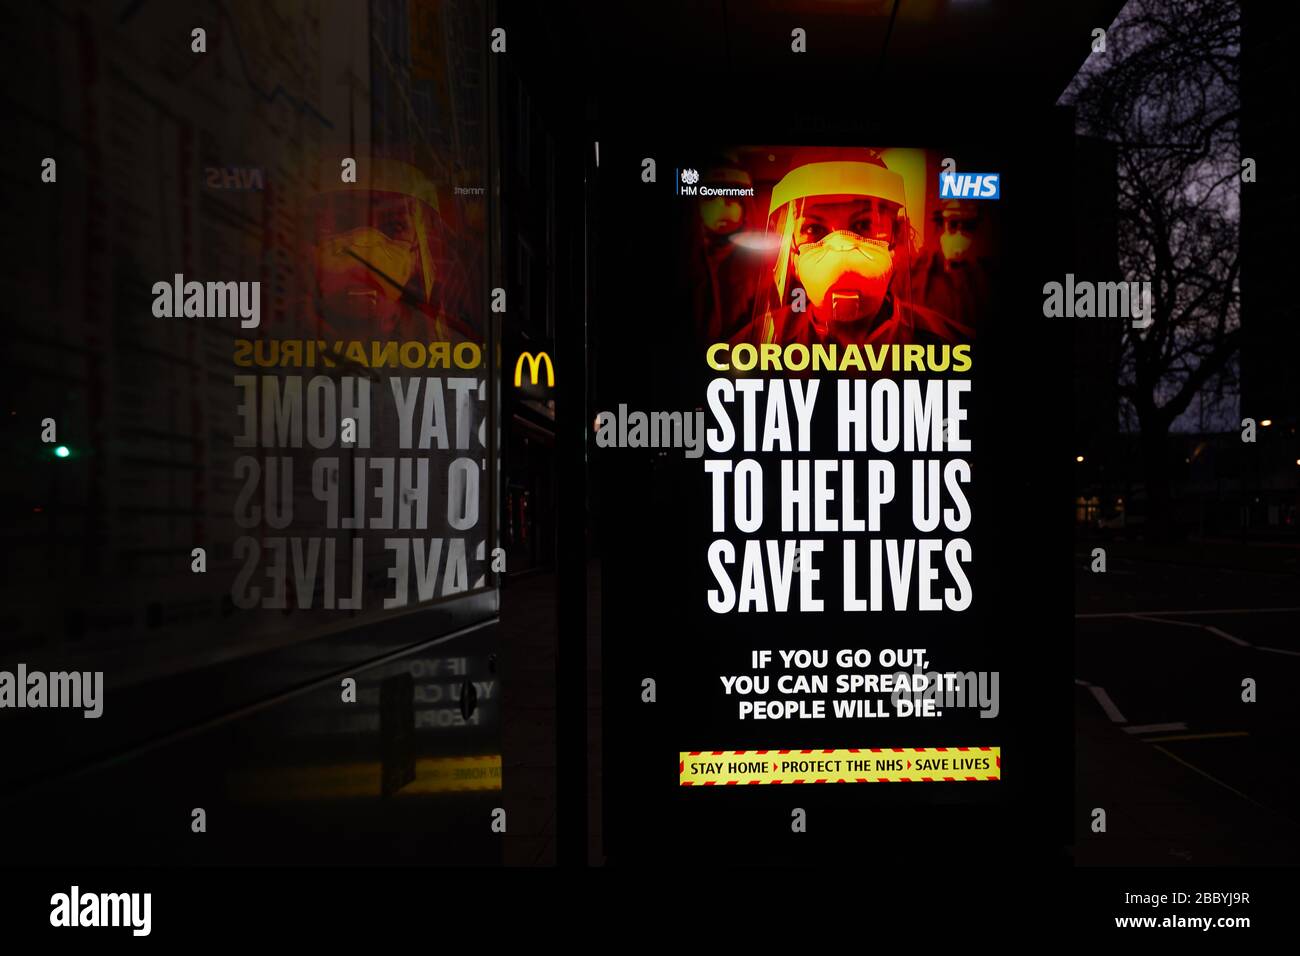 London, U.K. - 02 Apr 2020: A bus-stop electronic billboard message from the UK government, warning the public to stay at home during the coronavirus pandemic. Stock Photo